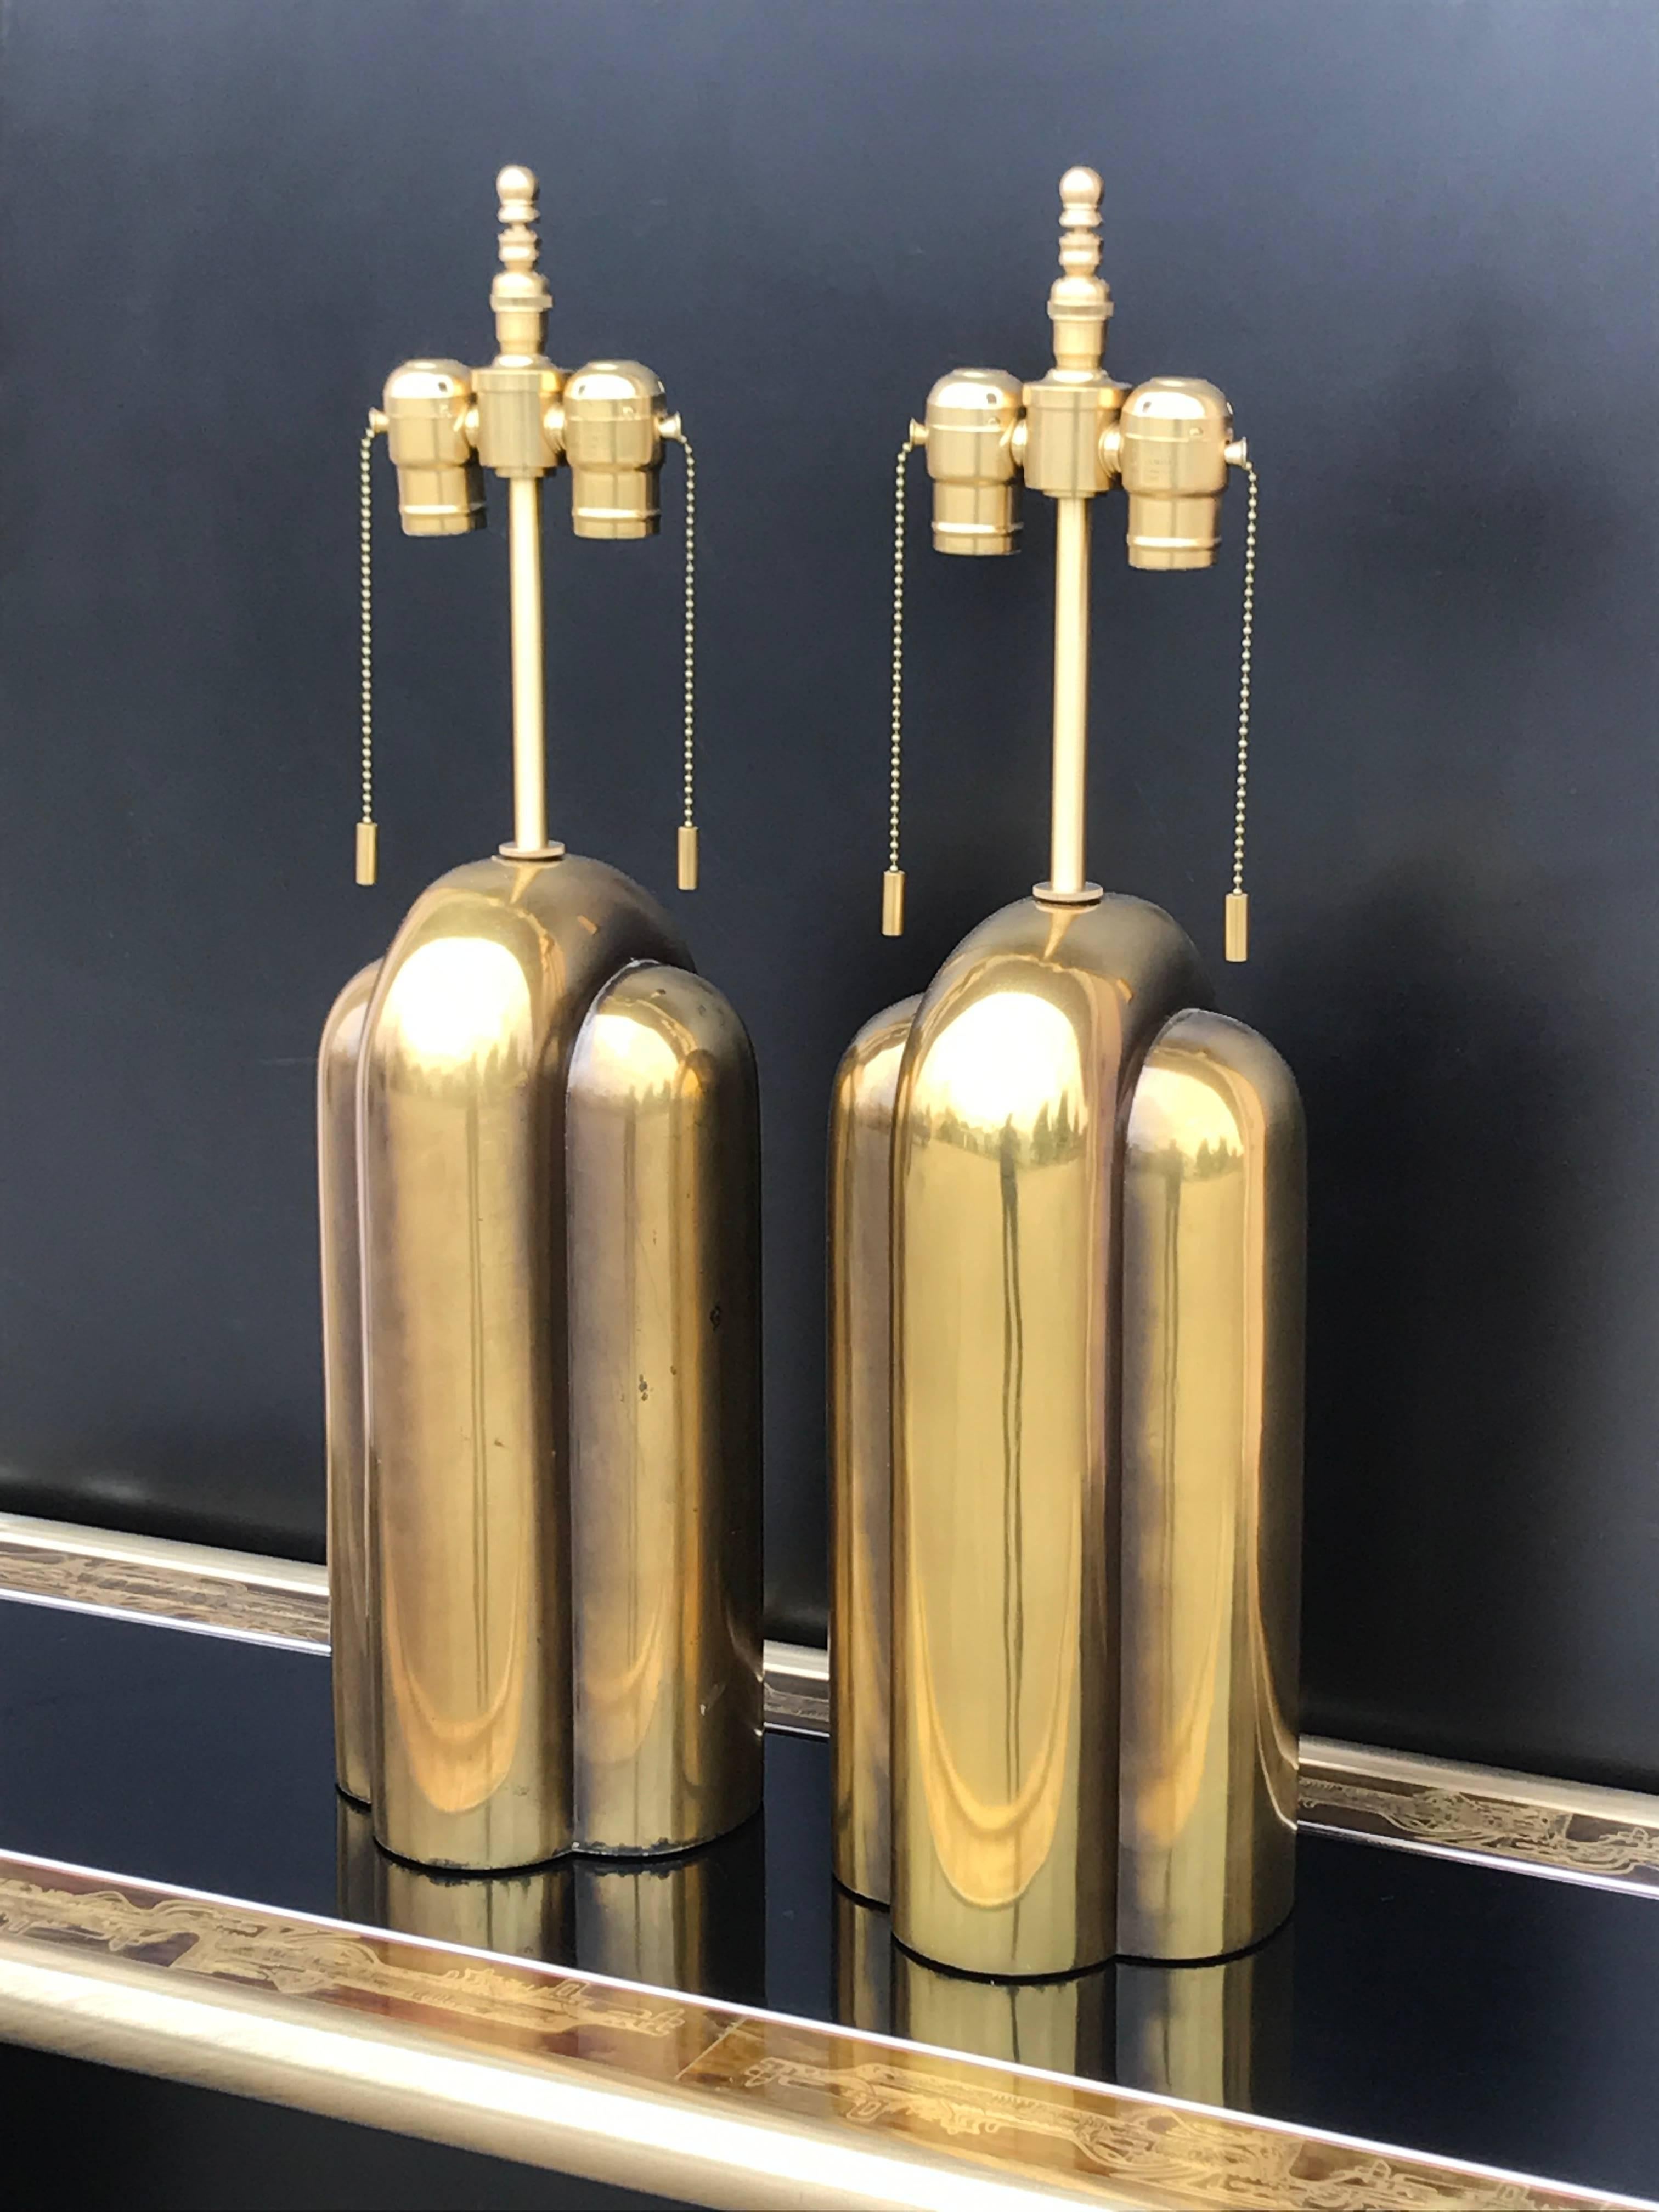 Pair of patinated brass Art Deco style lamps by Westwood Industries.